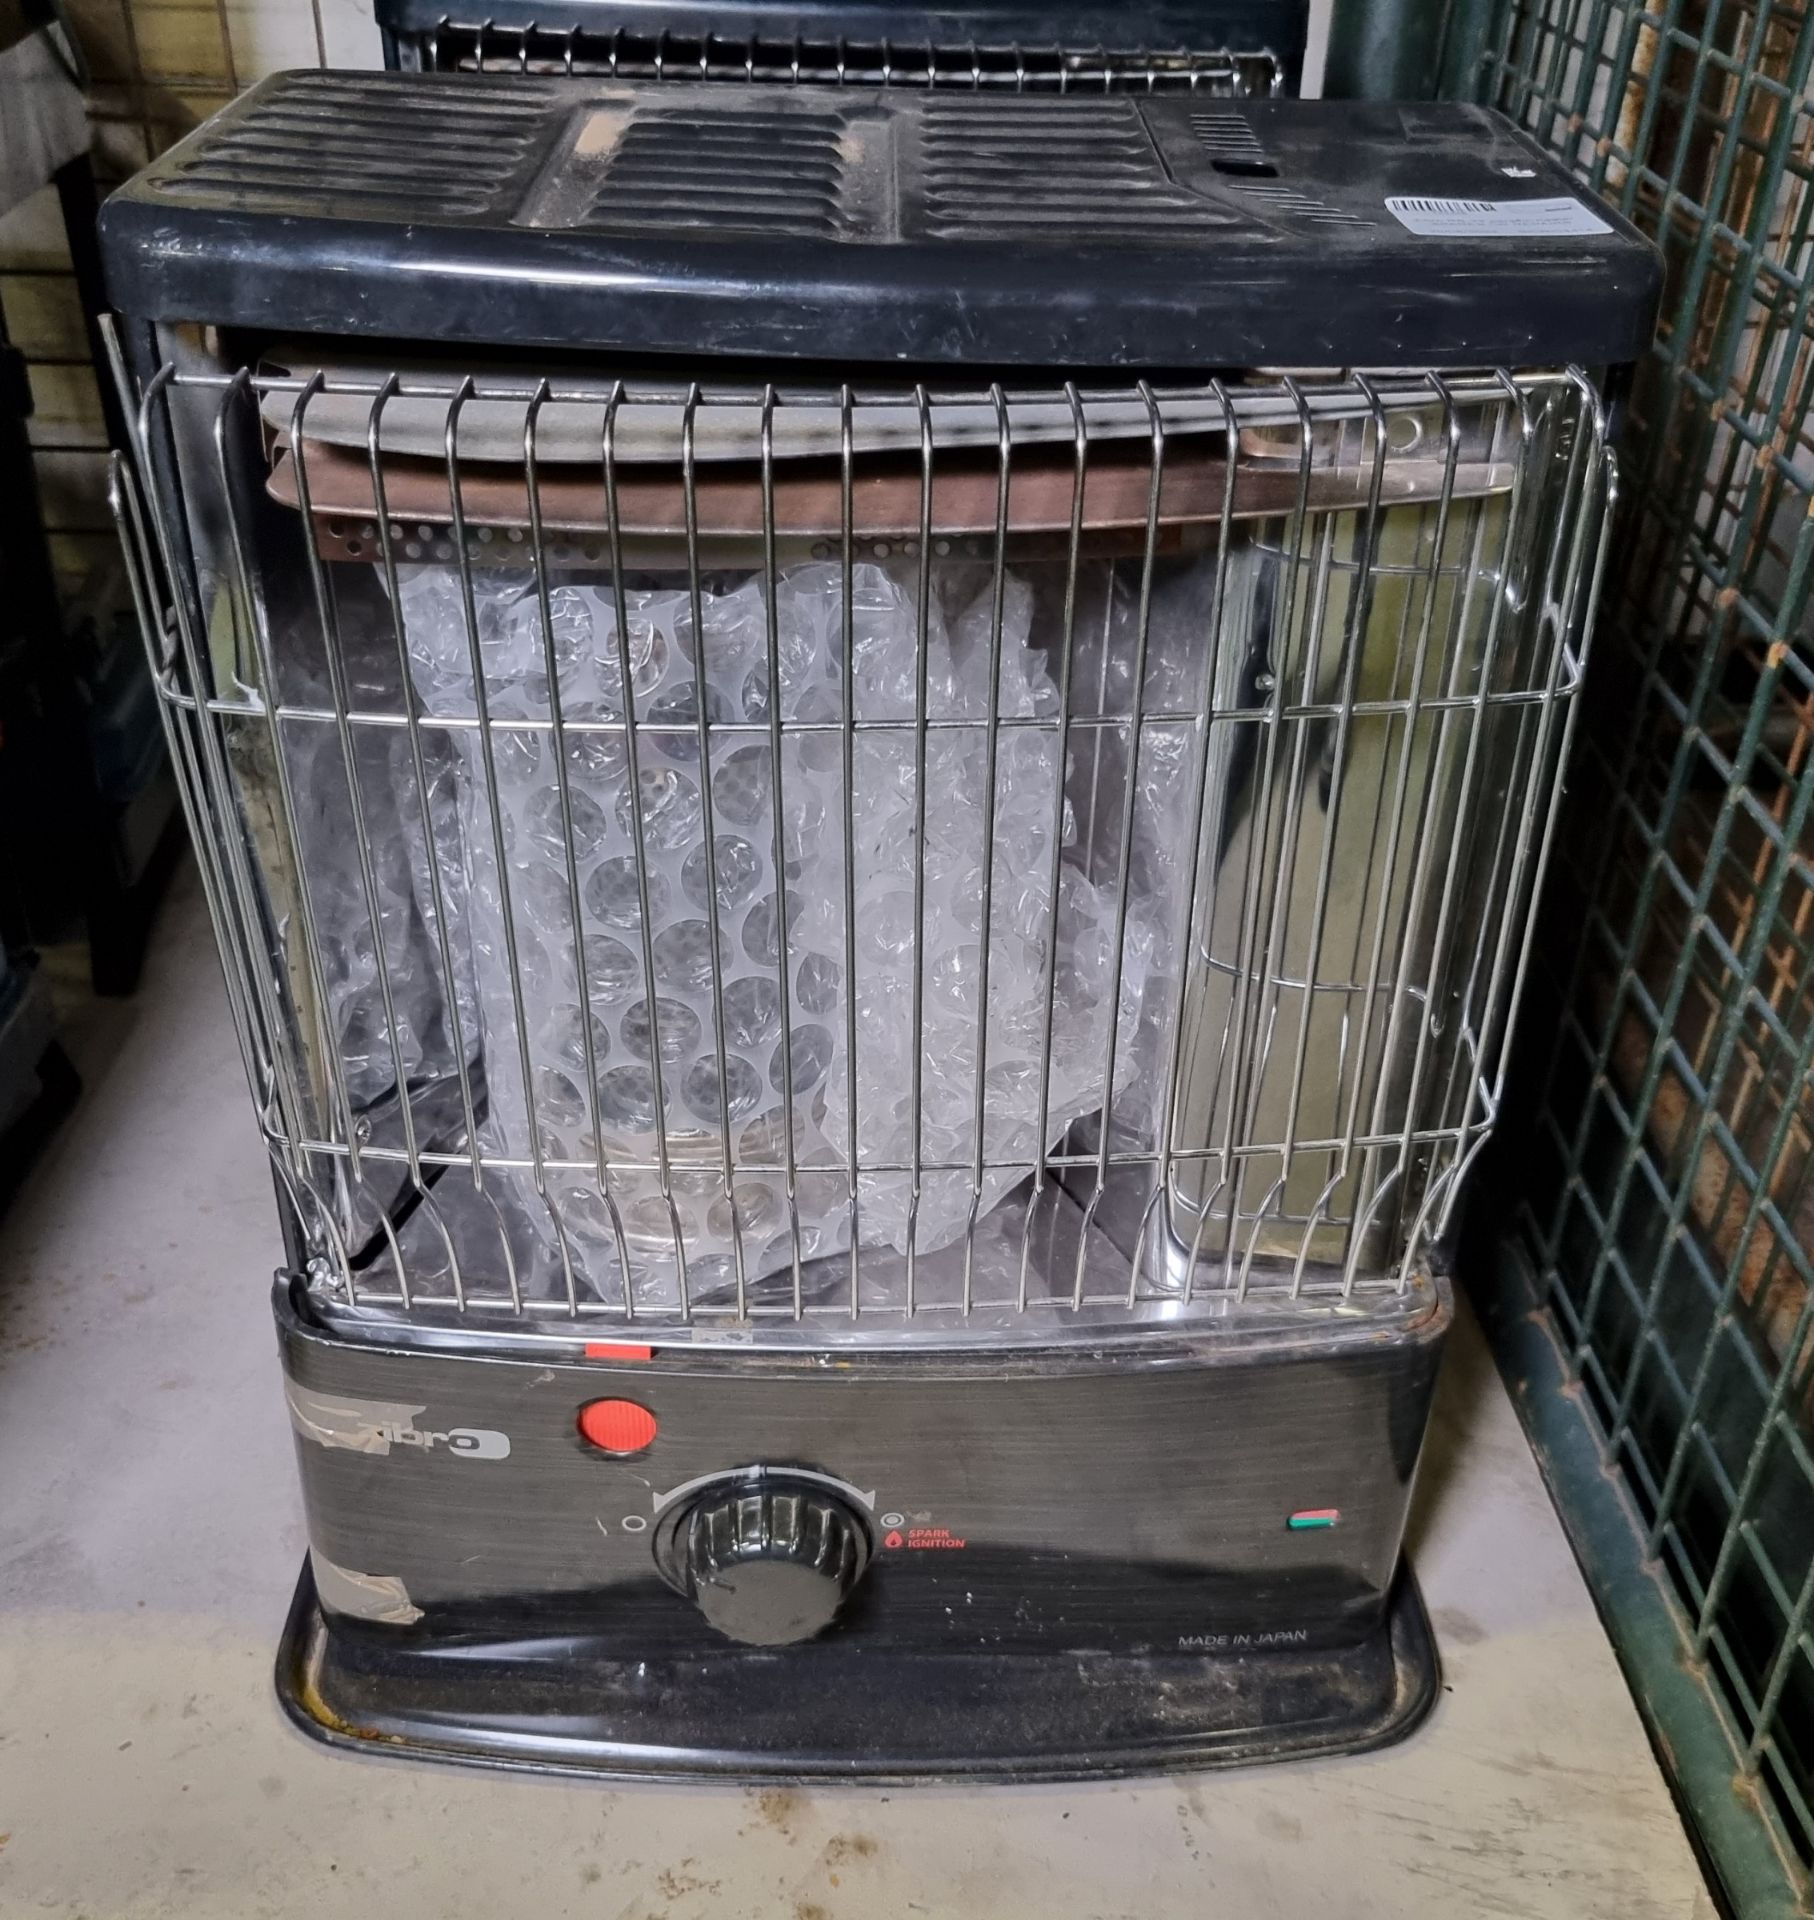 Zibro RS-29 paraffin heater - SPARES OR REPAIRS, 3x Twin burner paraffin space heaters - W 330 - Image 4 of 5